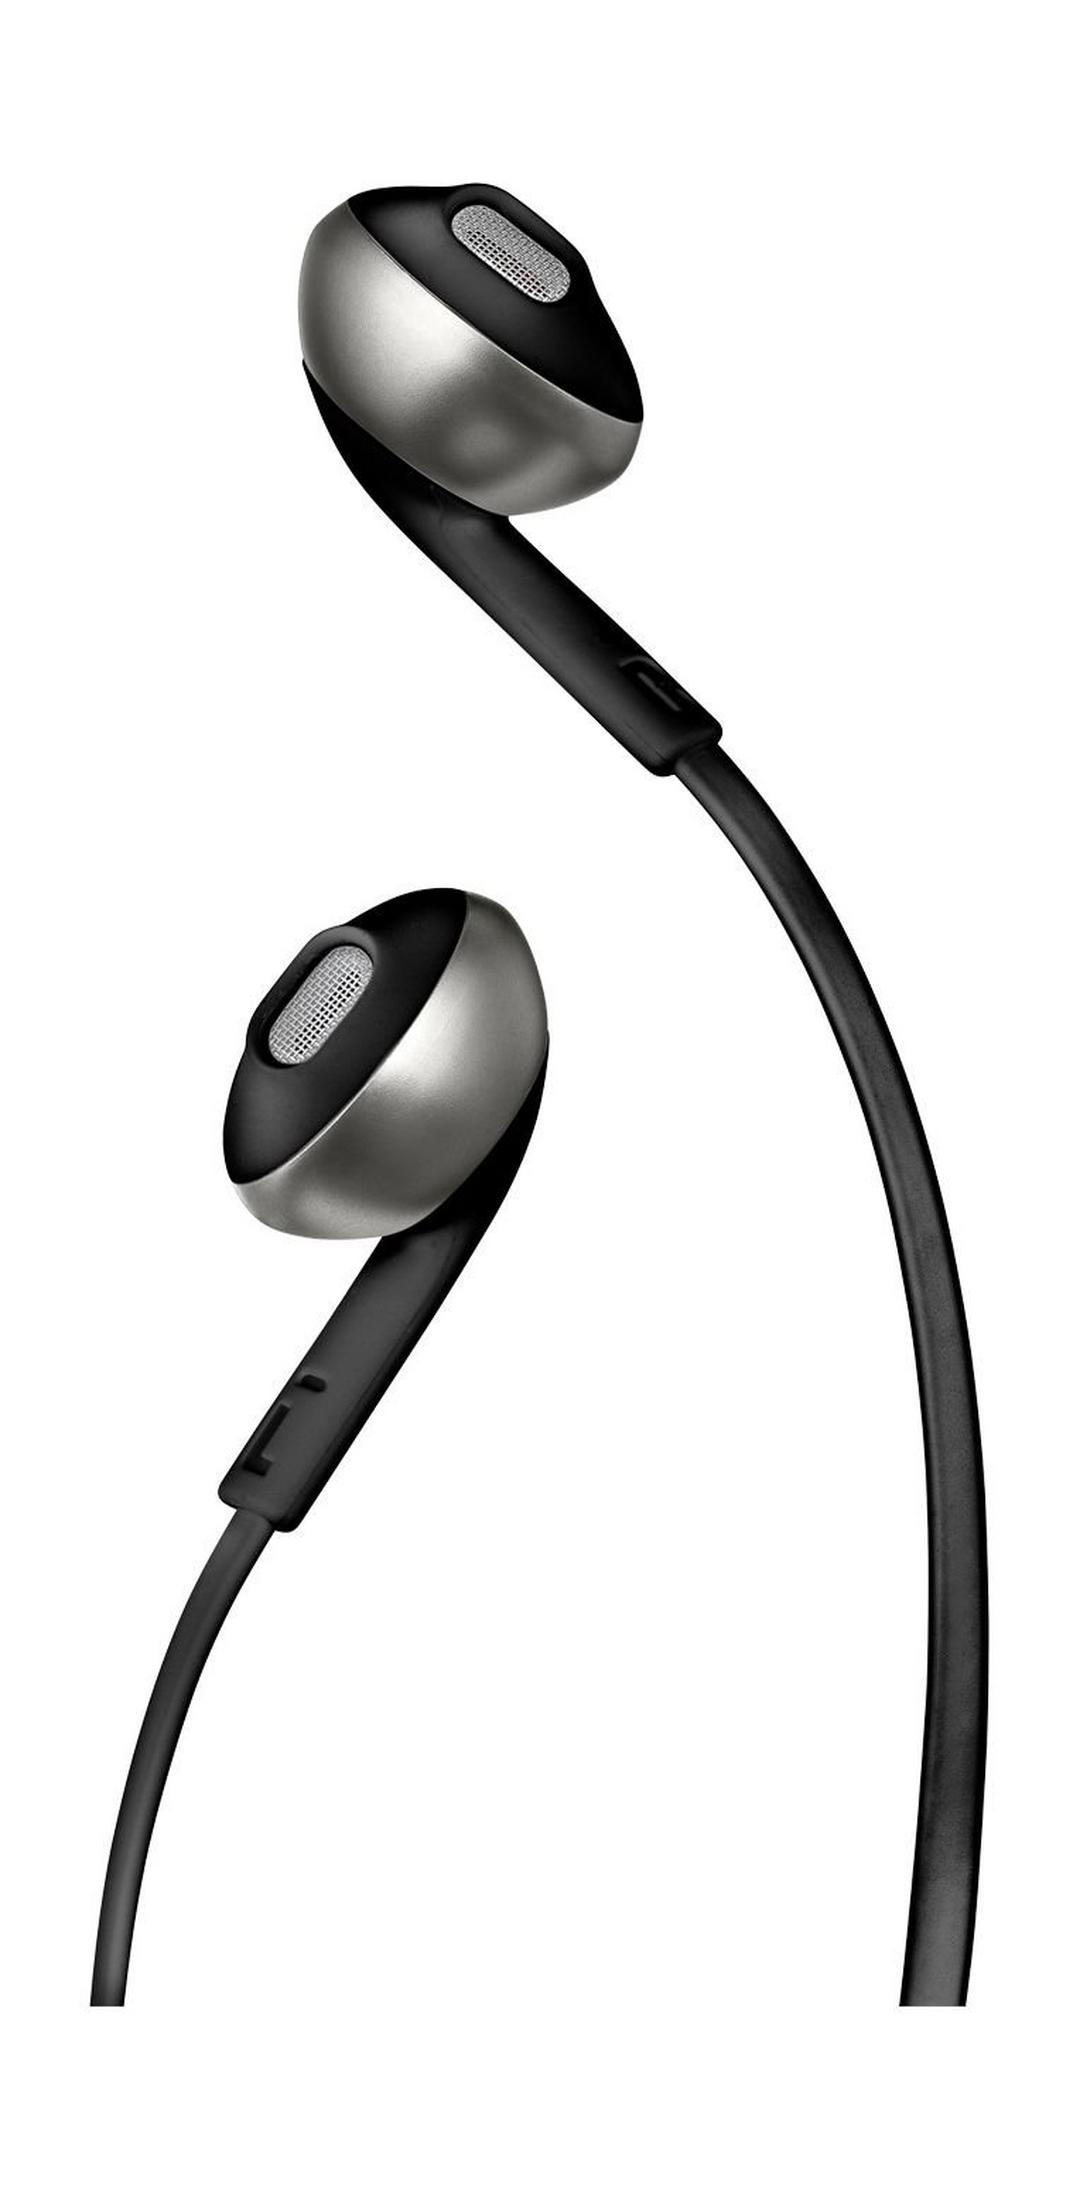 JBL T205 Wired Earphone With Microphone - Black